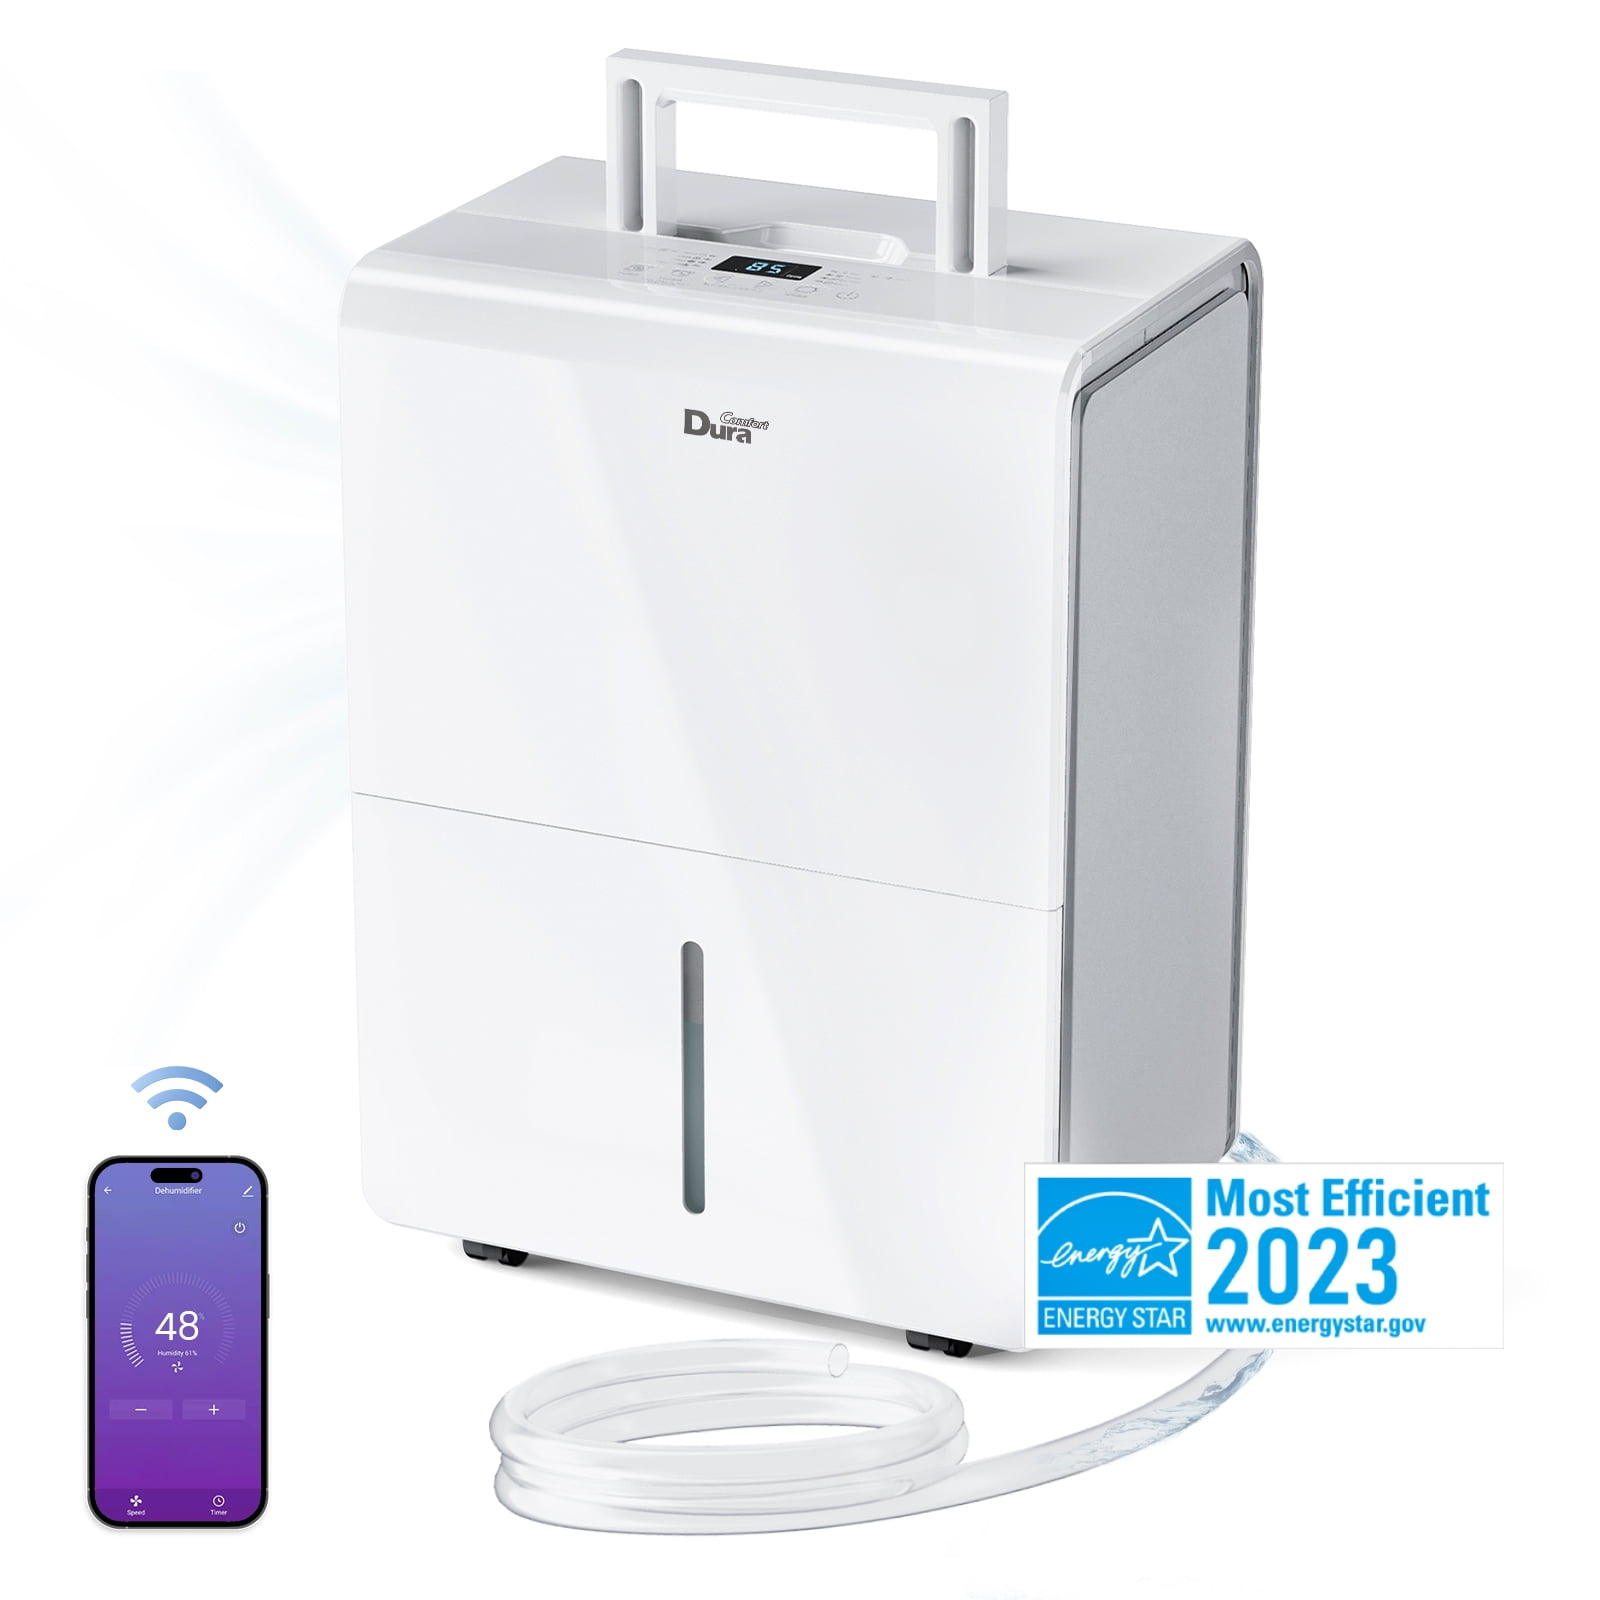 FREONIC Energy Star 16.9 pt. Up to 4500 sq.ft. Dehumidifier in. White With  Internal Pump FHCD501PWG - The Home Depot